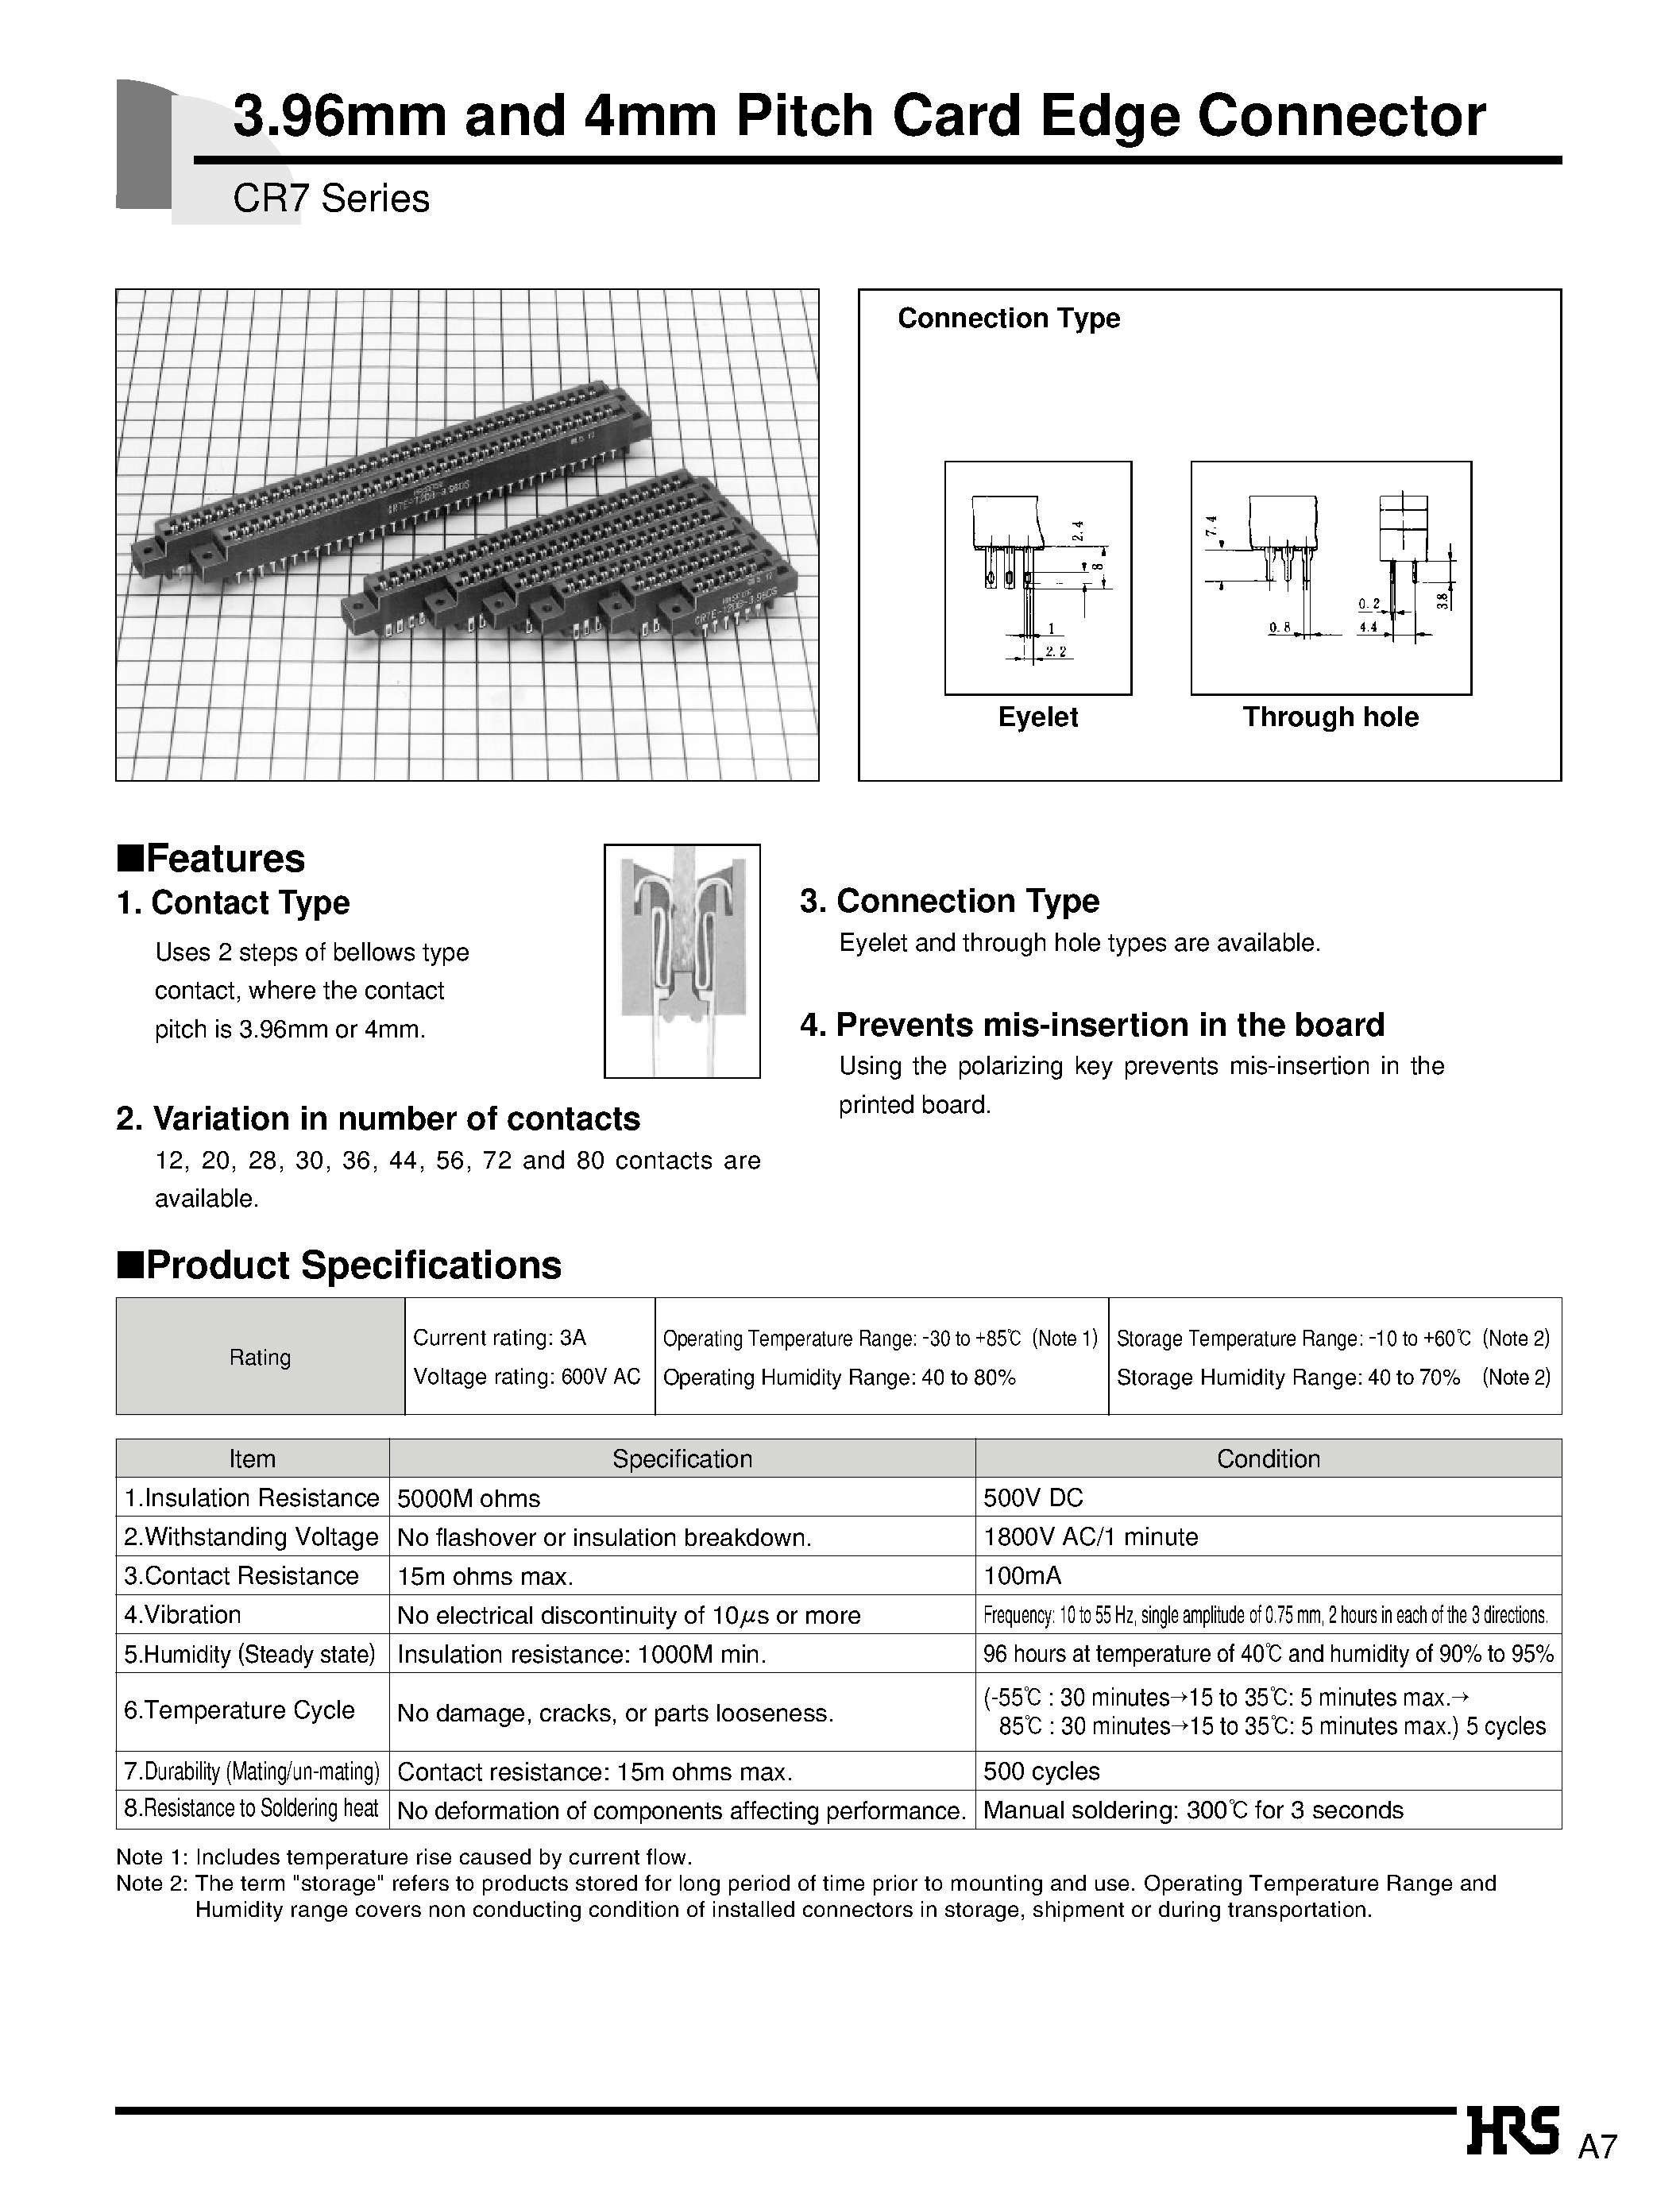 Datasheet CR7E-20DB-3.96E - 3.96mm and 4mm Pitch Card Edge Connector page 1